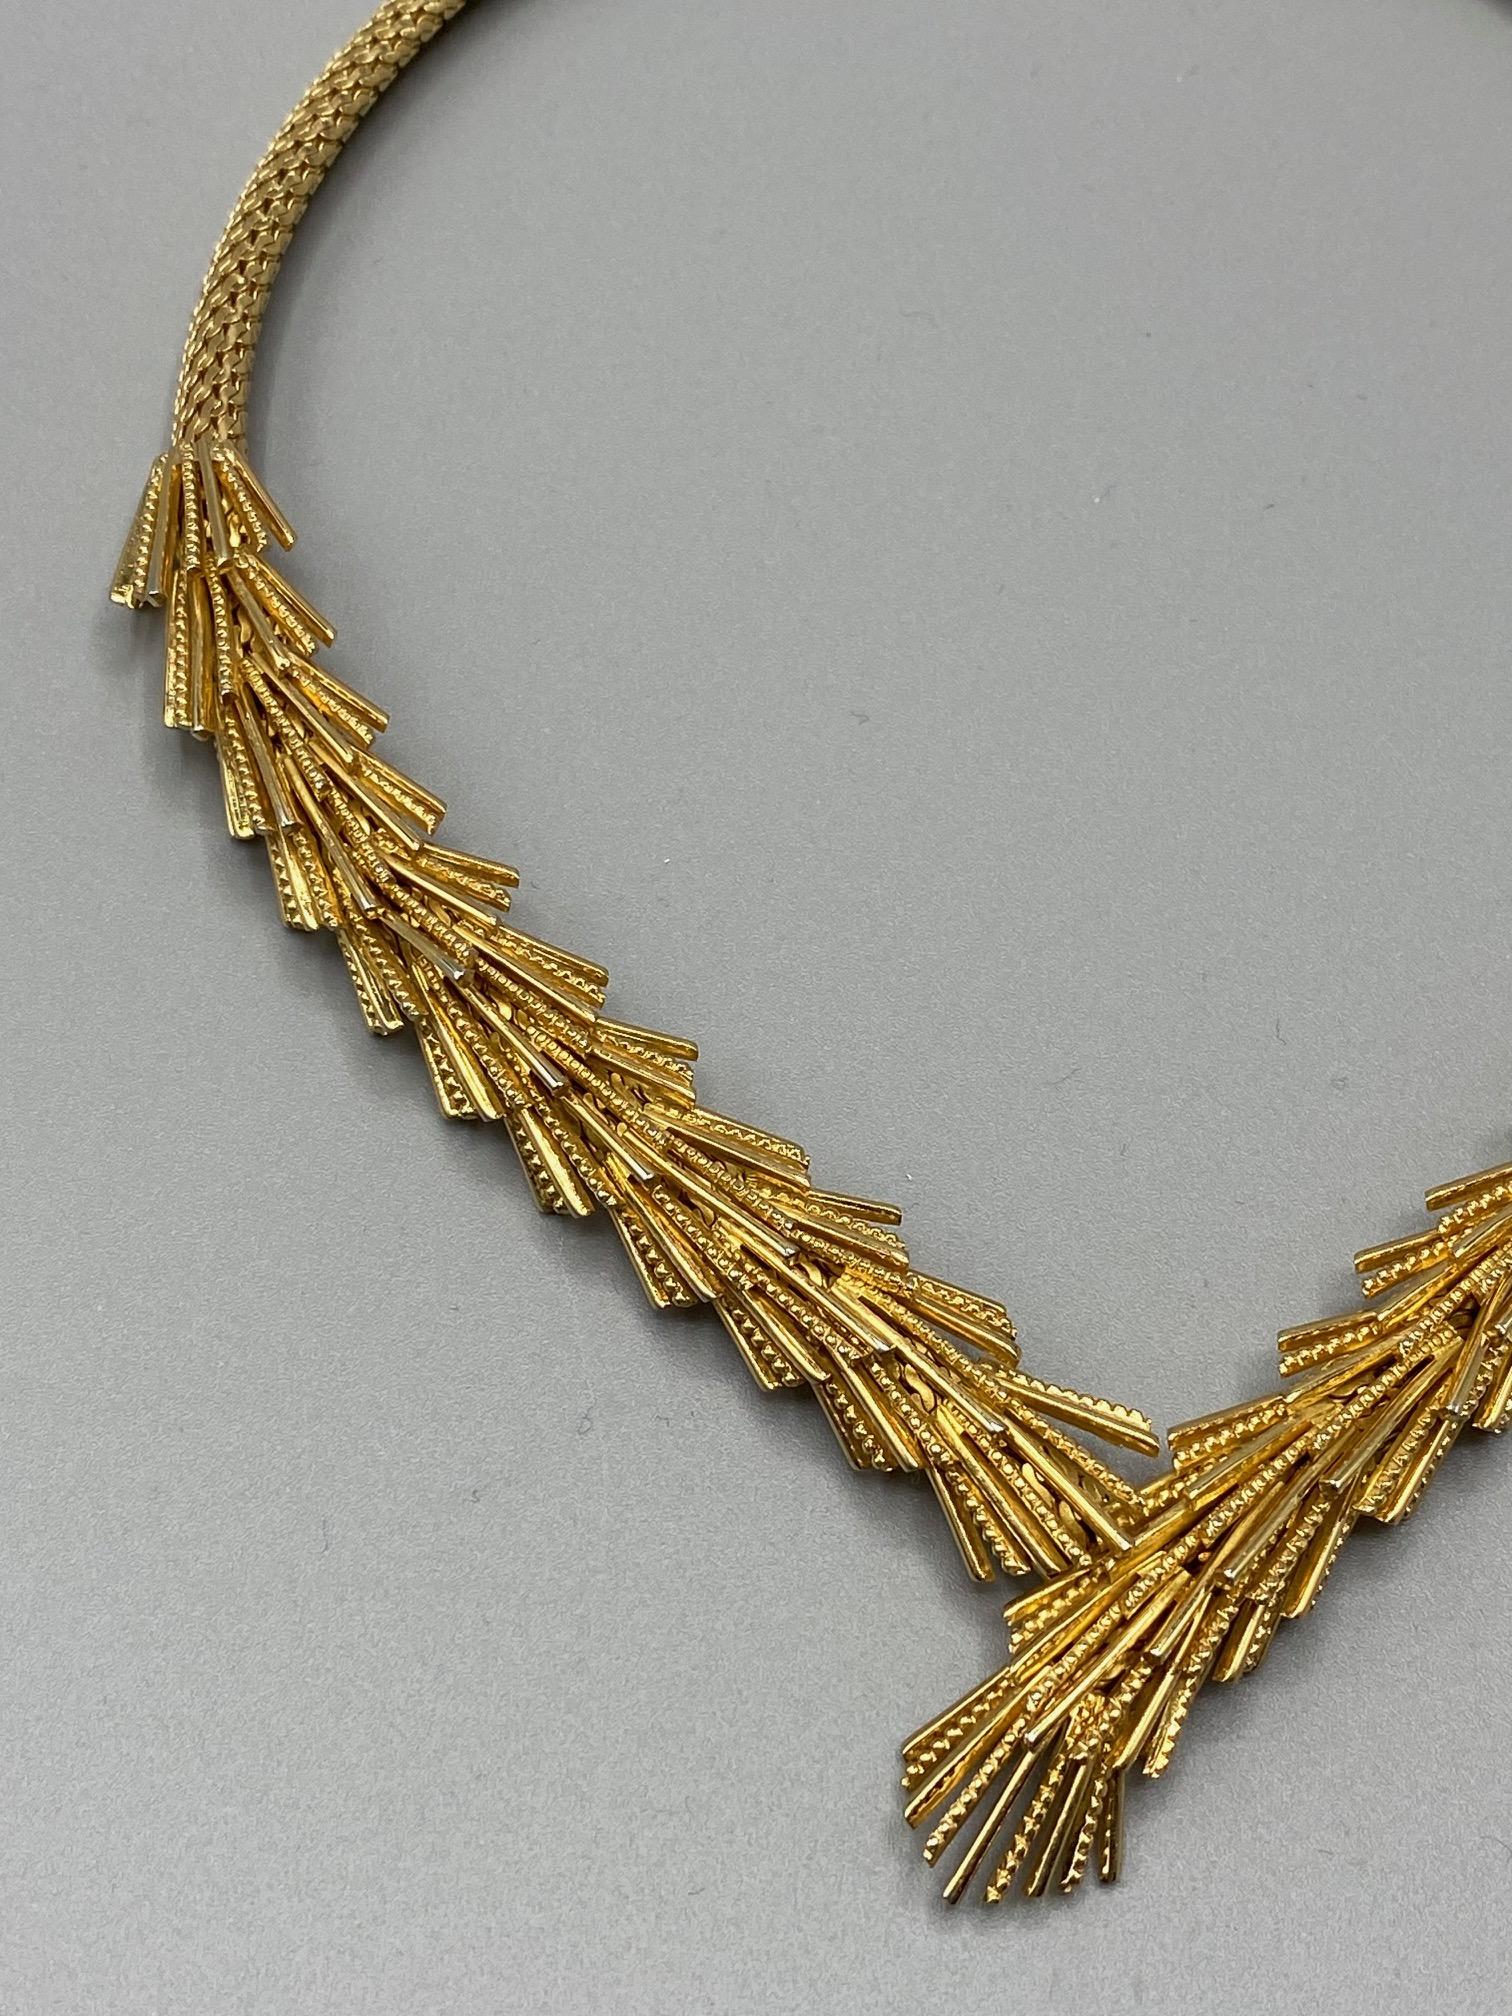 Grosse Germany Gold Necklace from 1958 1